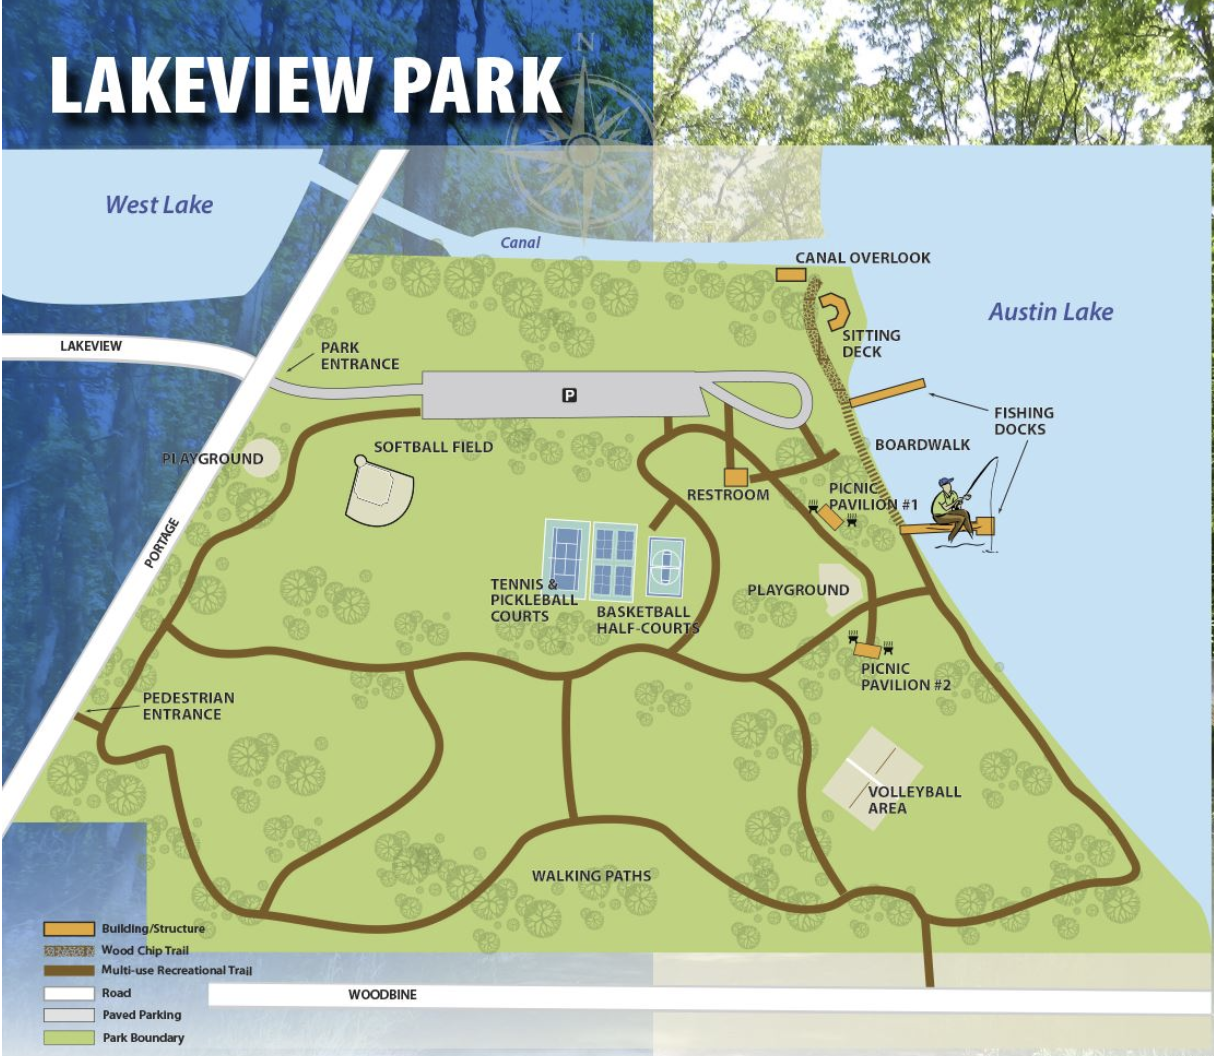 Lakeview Park map